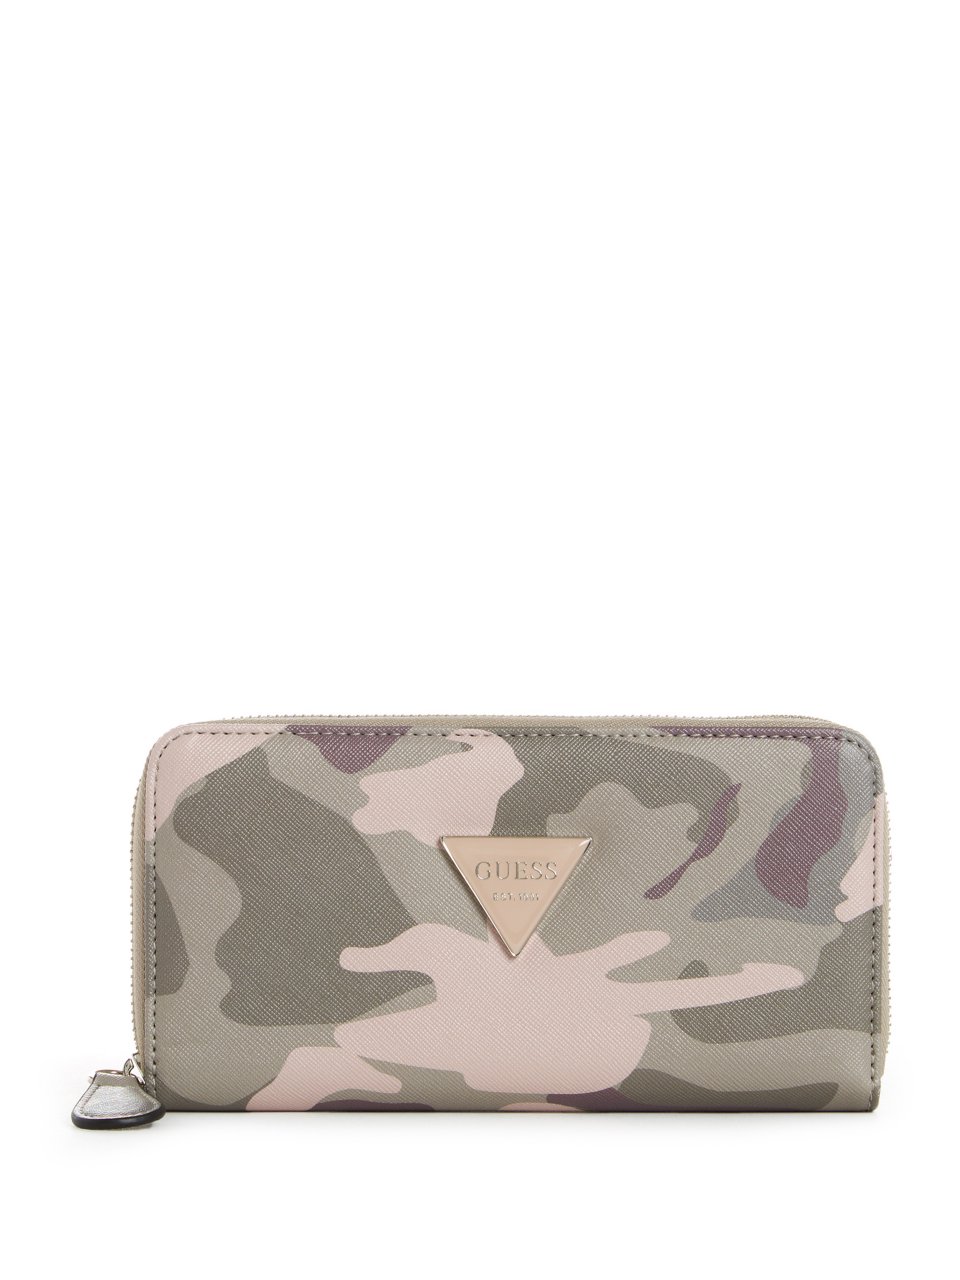 GUESS Factory Women's Abree Floral Wallet